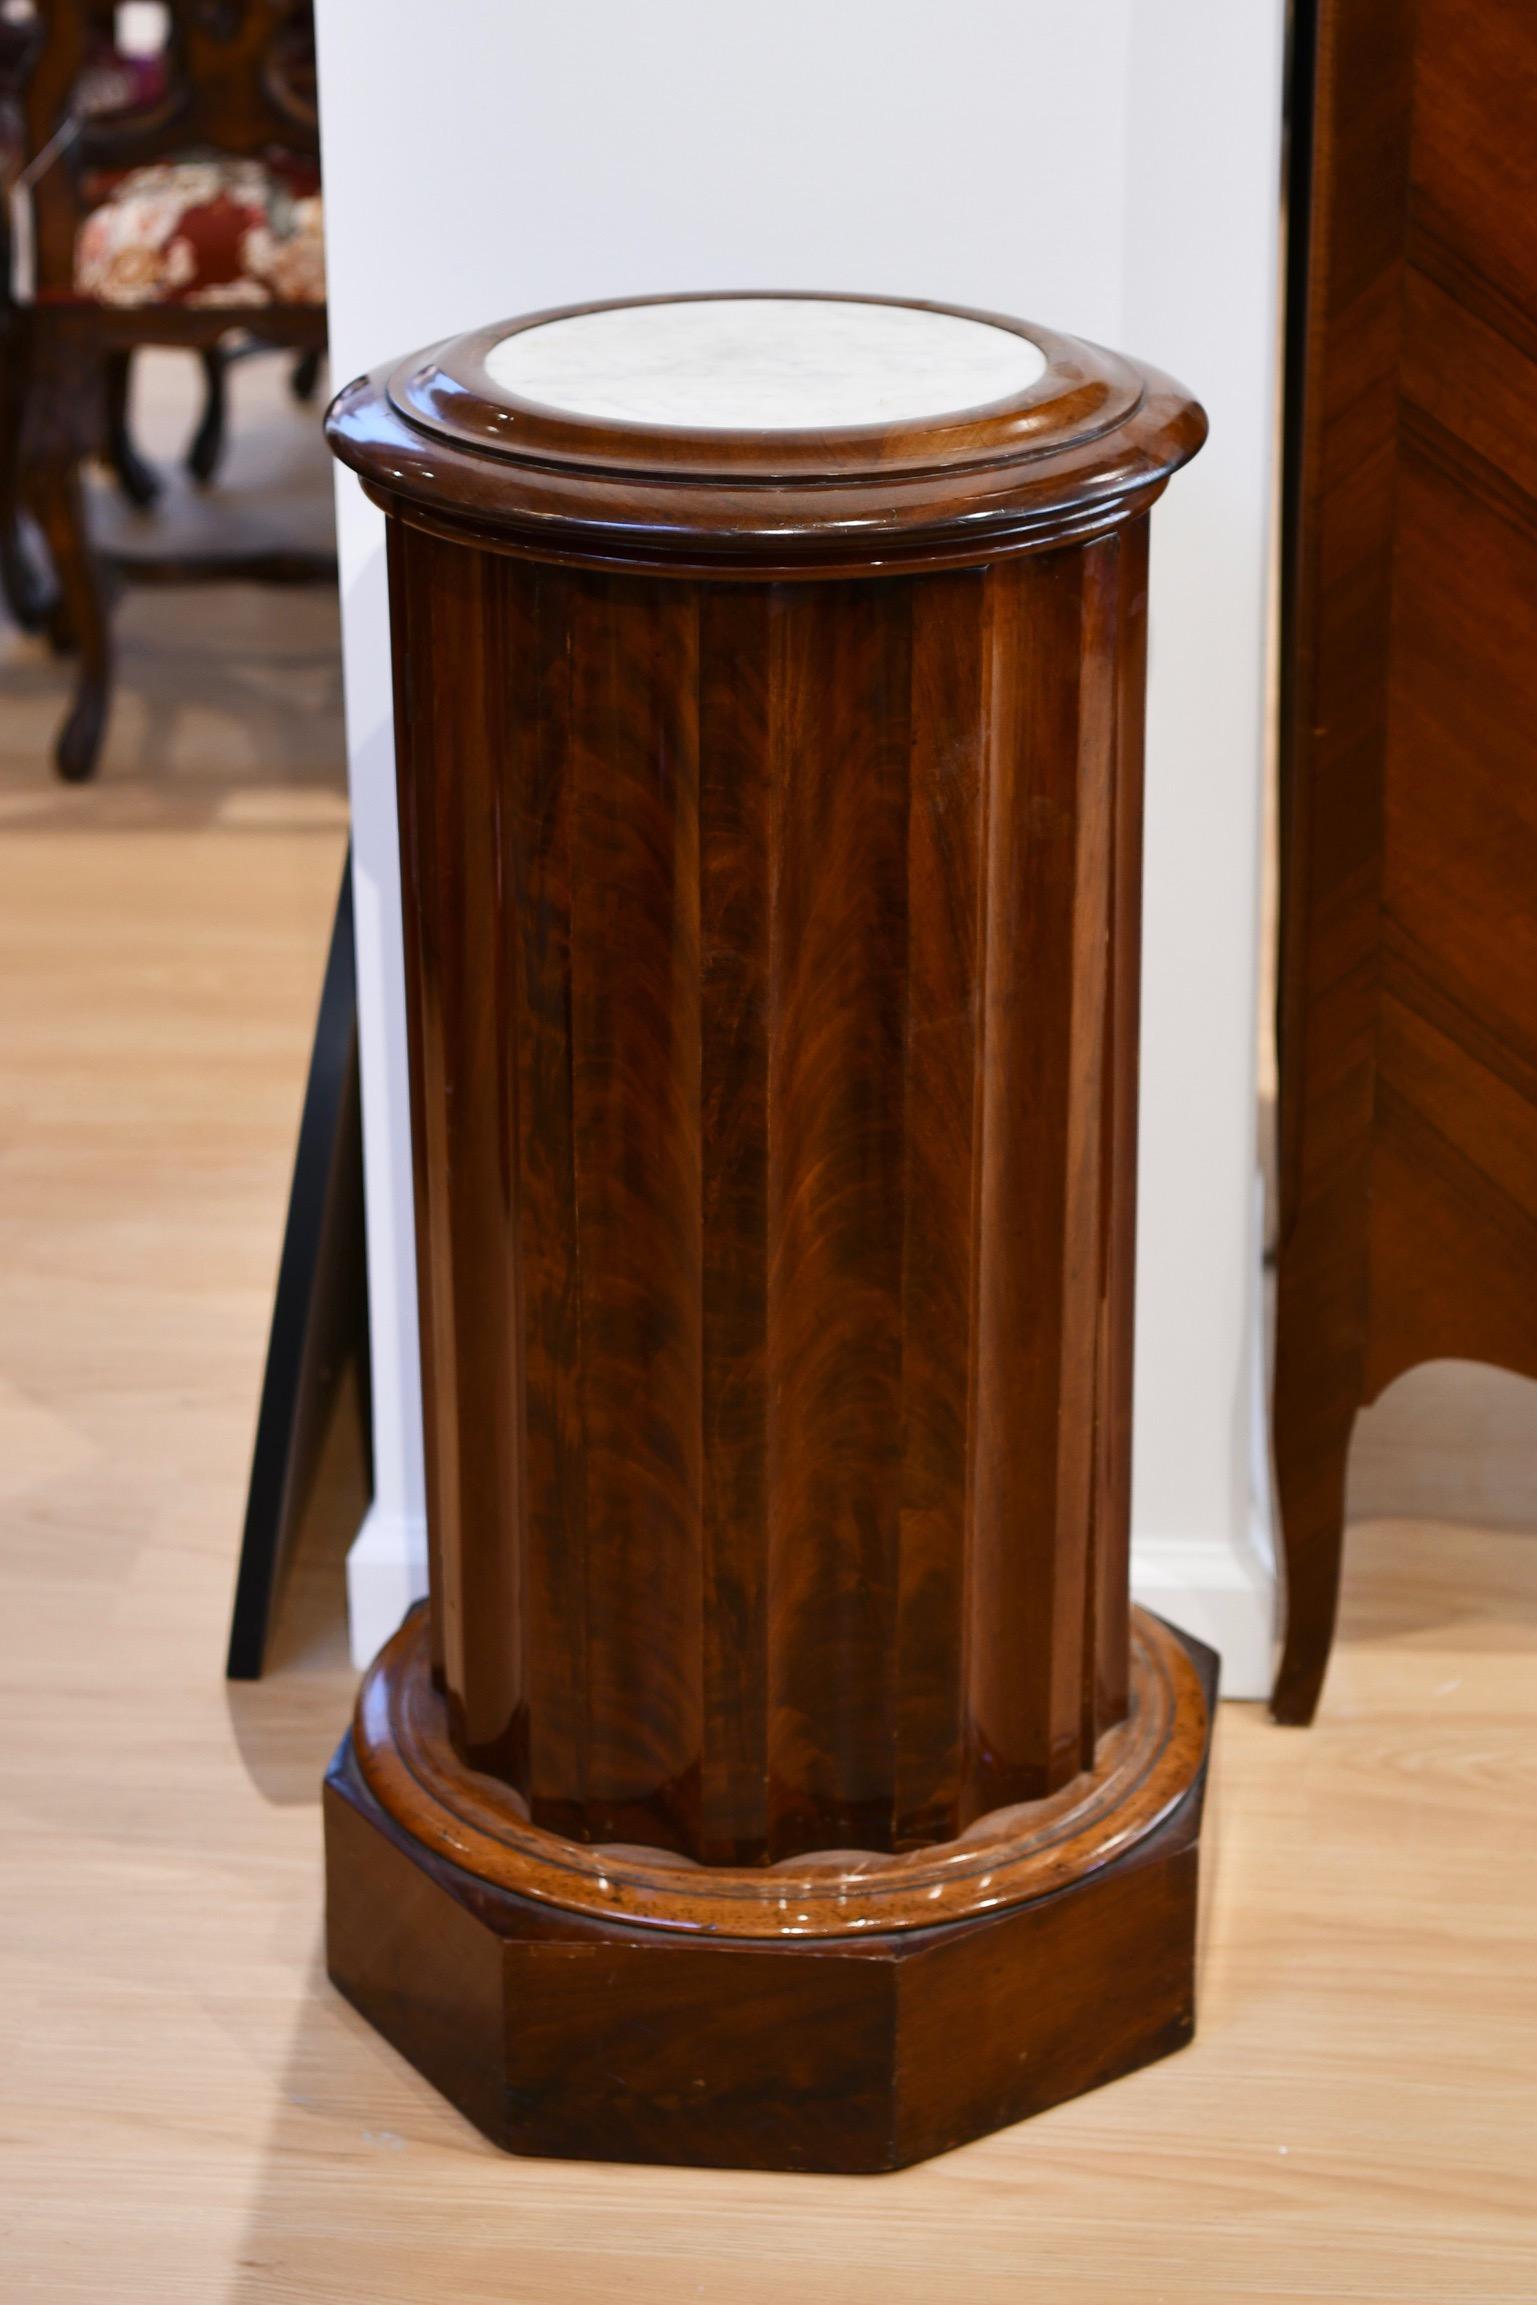 Antique mahogany column pedestal with marble inset hinge top covering transferware form mahogany lavabo (or bachelor table). Side panel opens. Circa 1810, France. Some cracks to transferware but structurally sound. Dimensions: 31